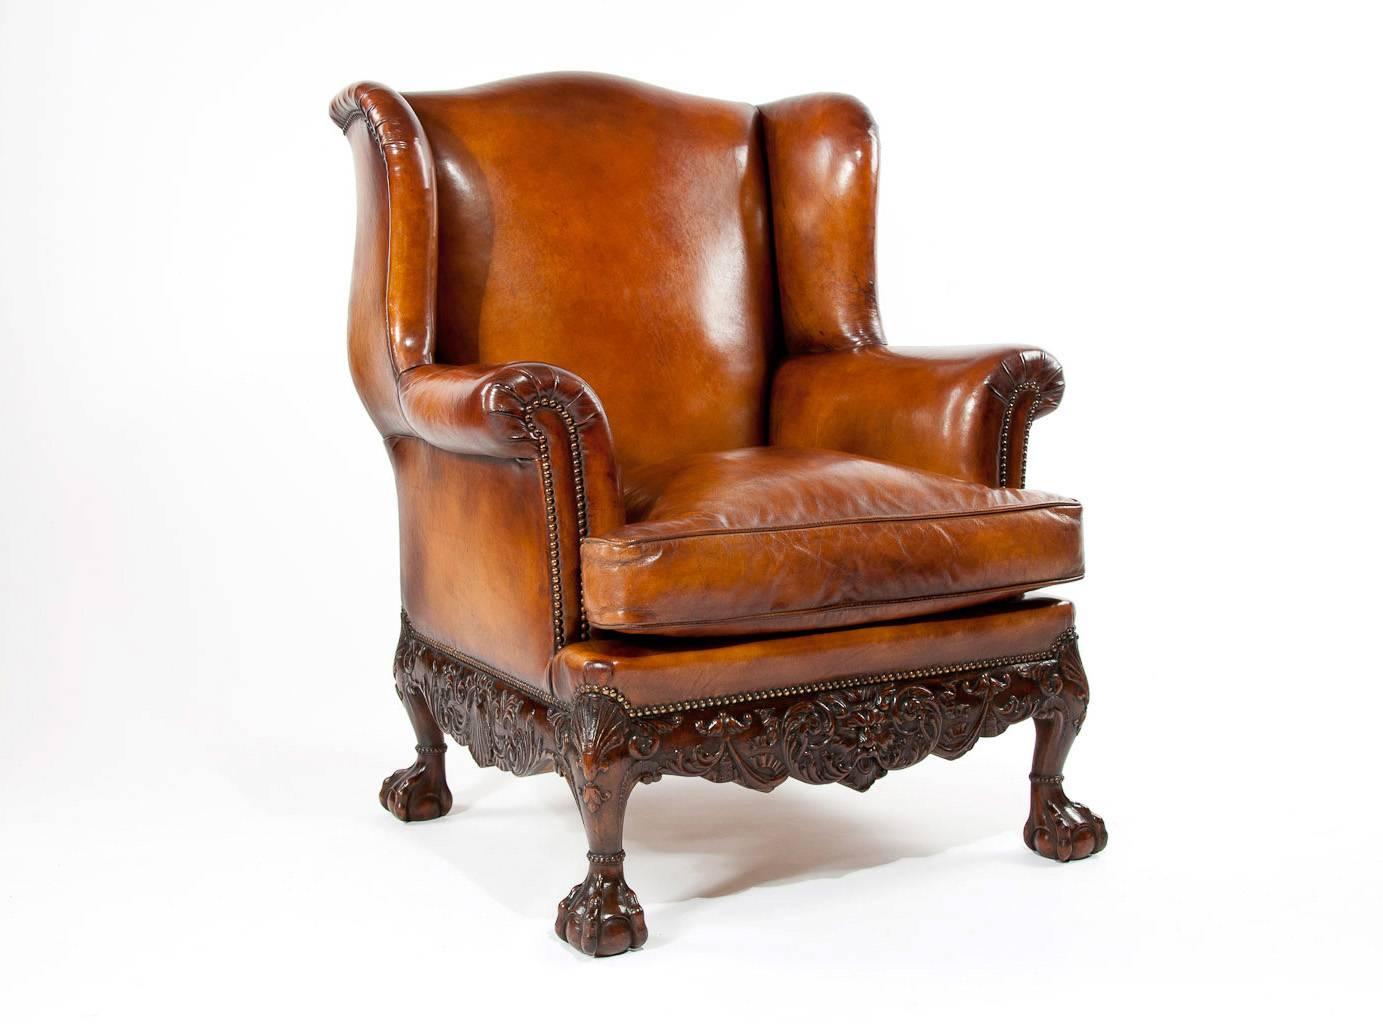 A superb quality carved mahogany 19th century leather upholstered wing armchair dating to circa 1880. This impressive wing armchair of decent size and good proportions has a wide feather cushioned seat making it extremely comfortable. The shaped